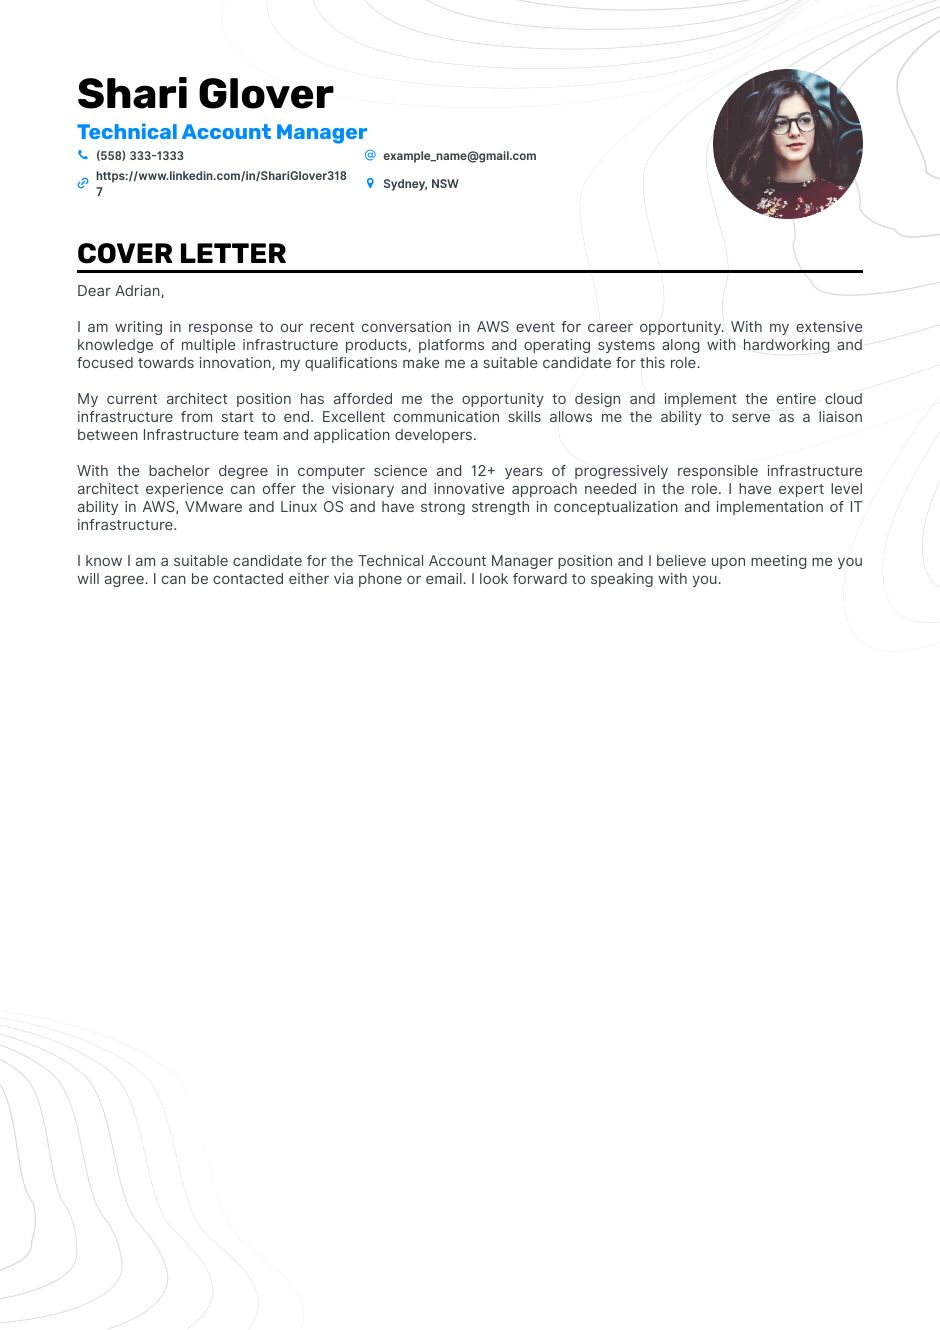 technical account manager coverletter.png